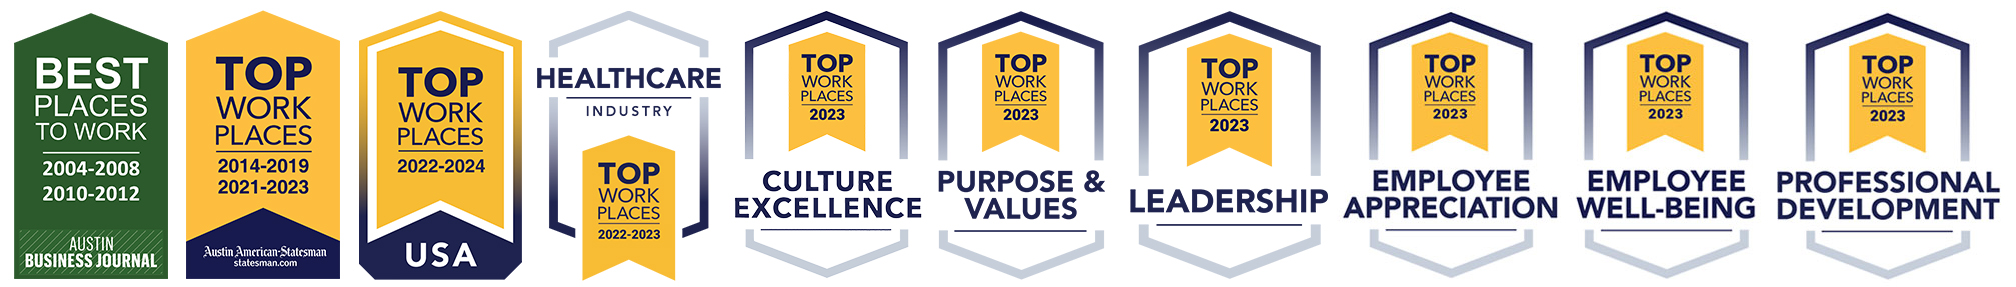 ARC's 7 Top Workplaces Awards from recent years